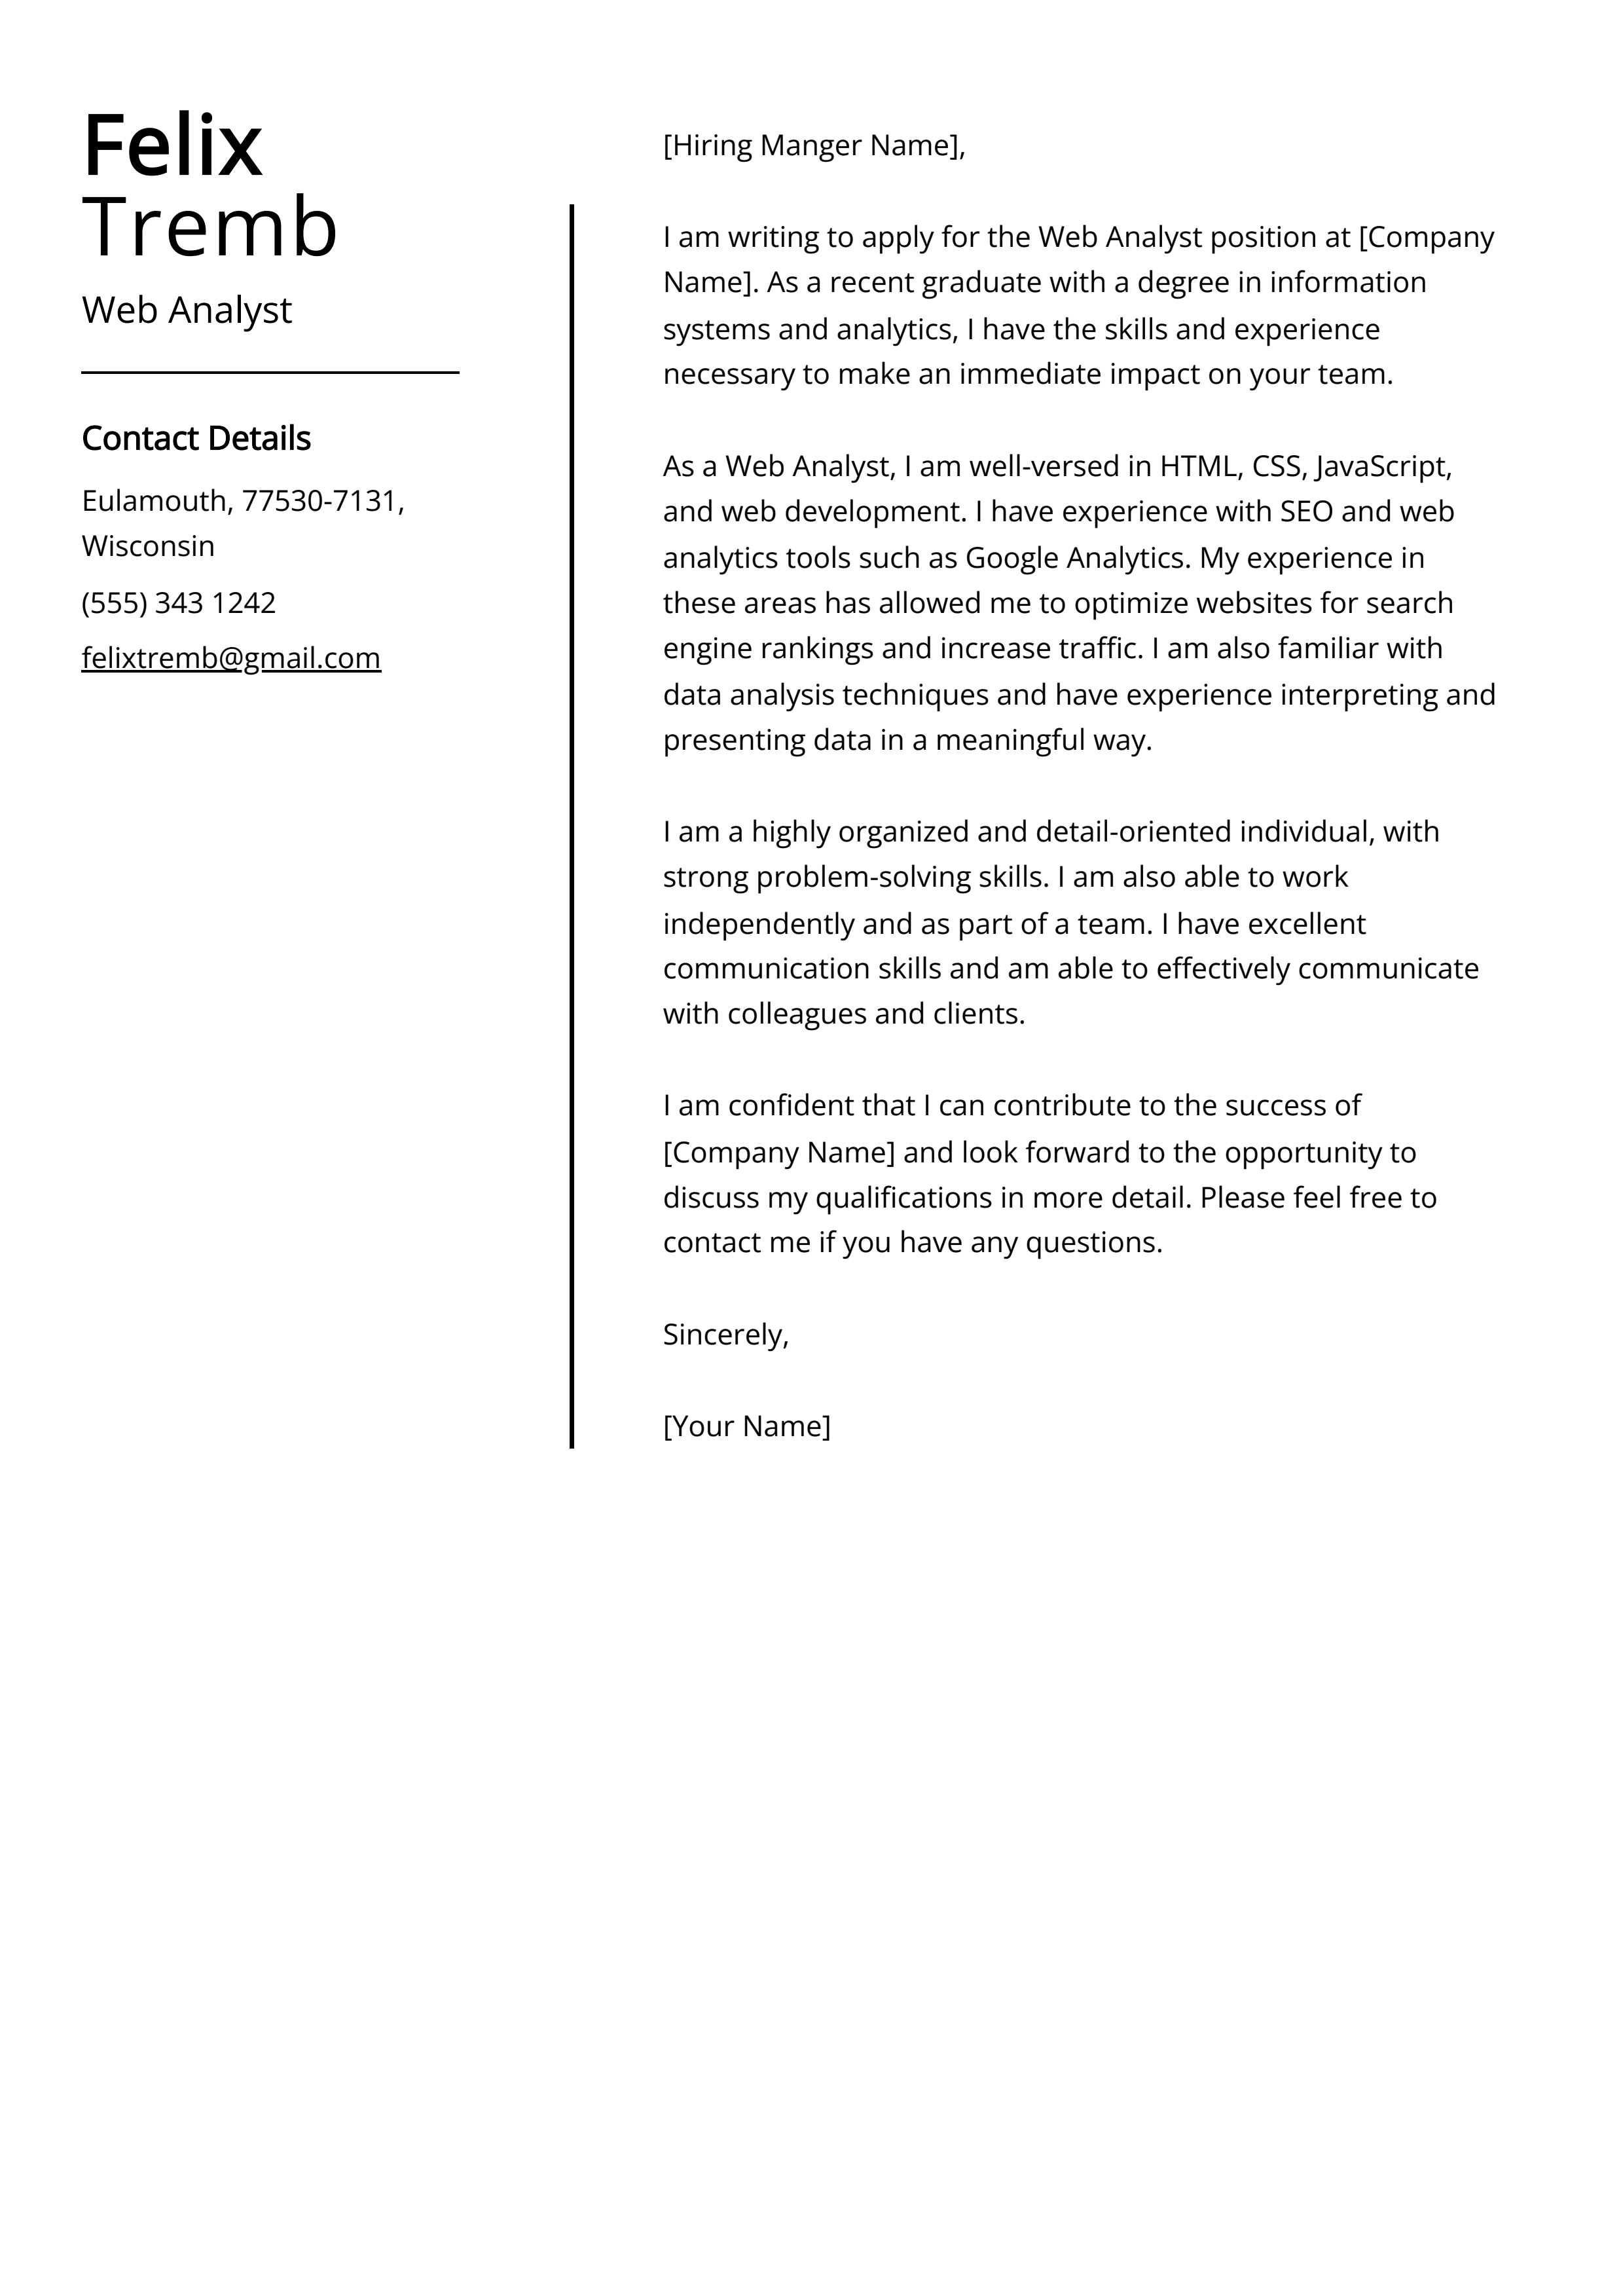 Web Analyst Cover Letter Example